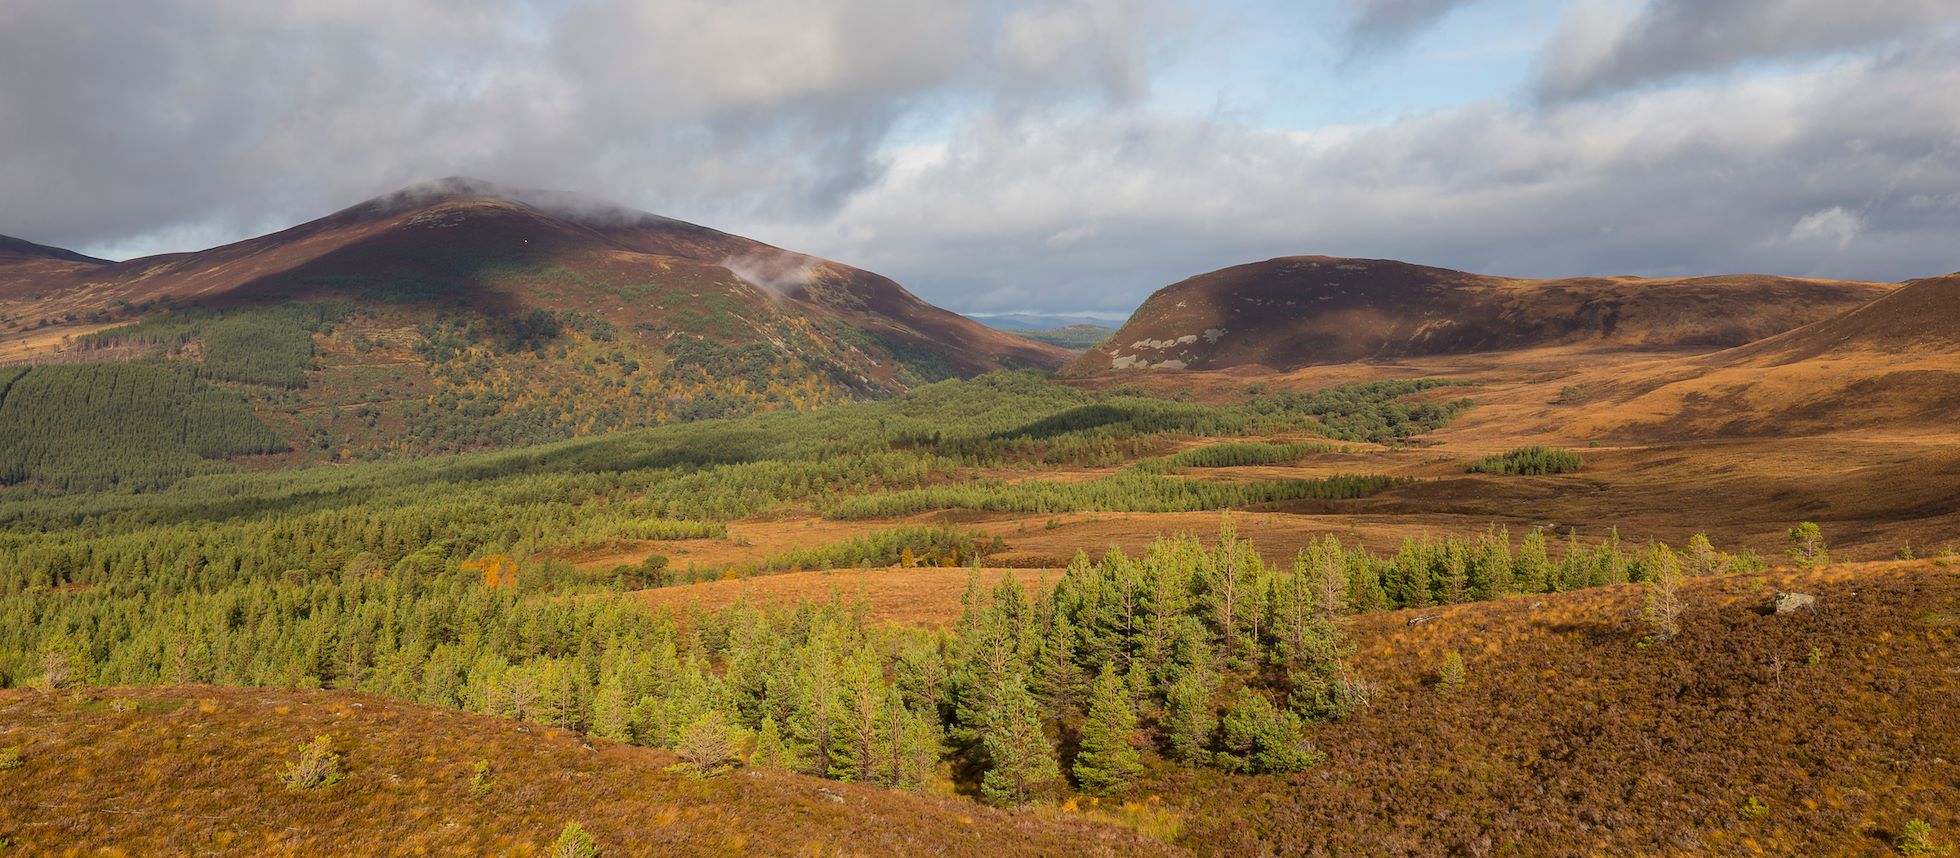 View across Glenmore Forest tpwards Ryvoan Pass, Cairngorms National Park, Scotland.